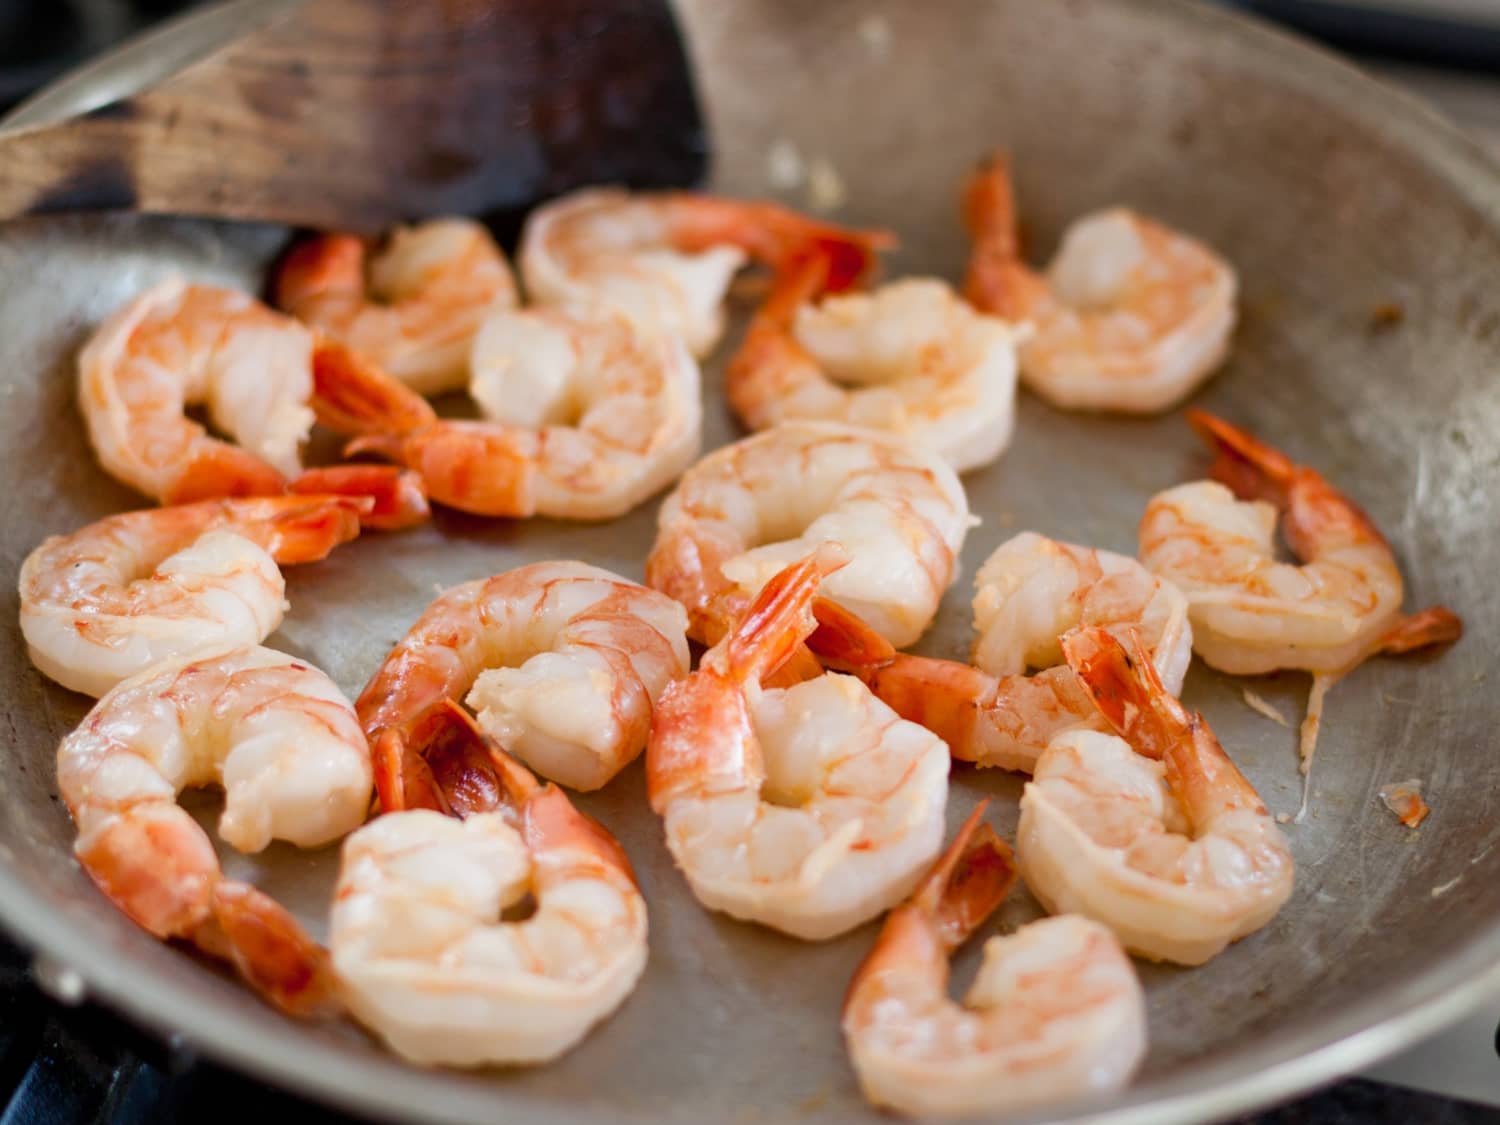 how-to-cook-shrimp-without-butter-or-oil-1702569168-3.jpg